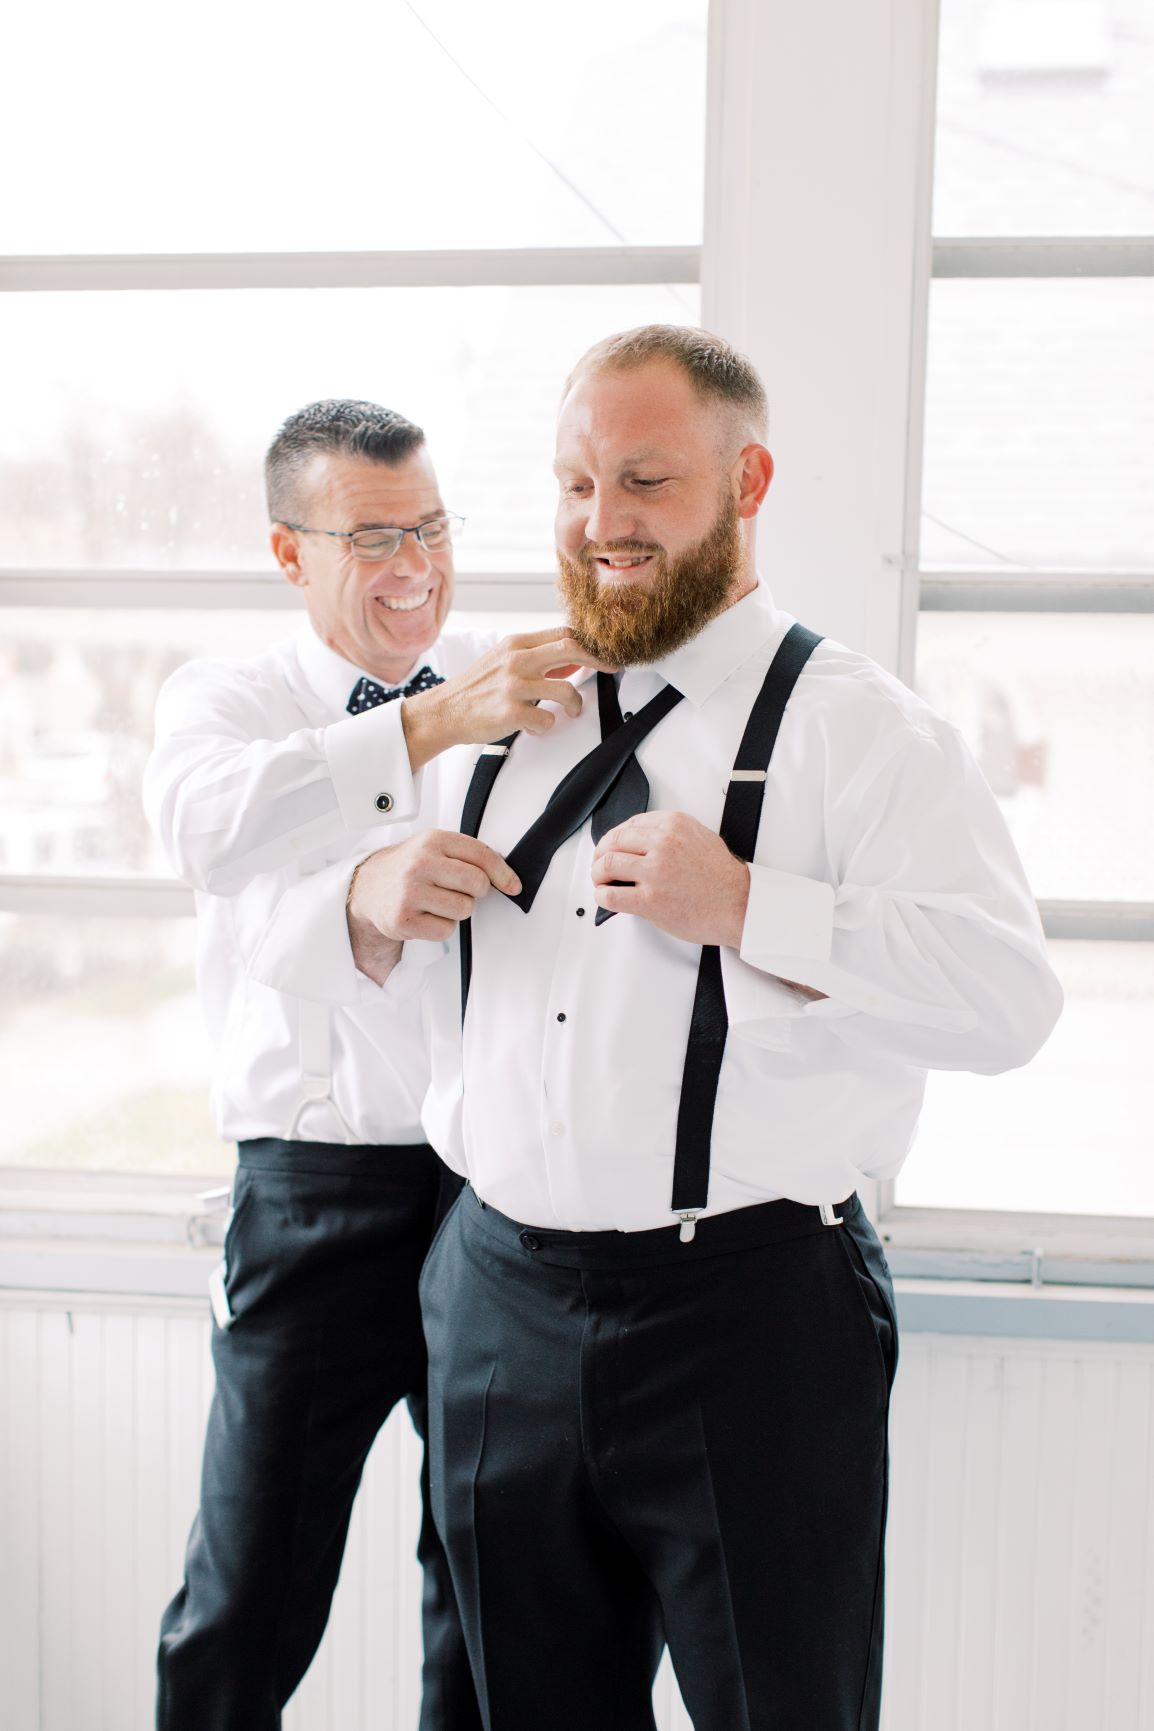 A man helping his son get ready for his wedding